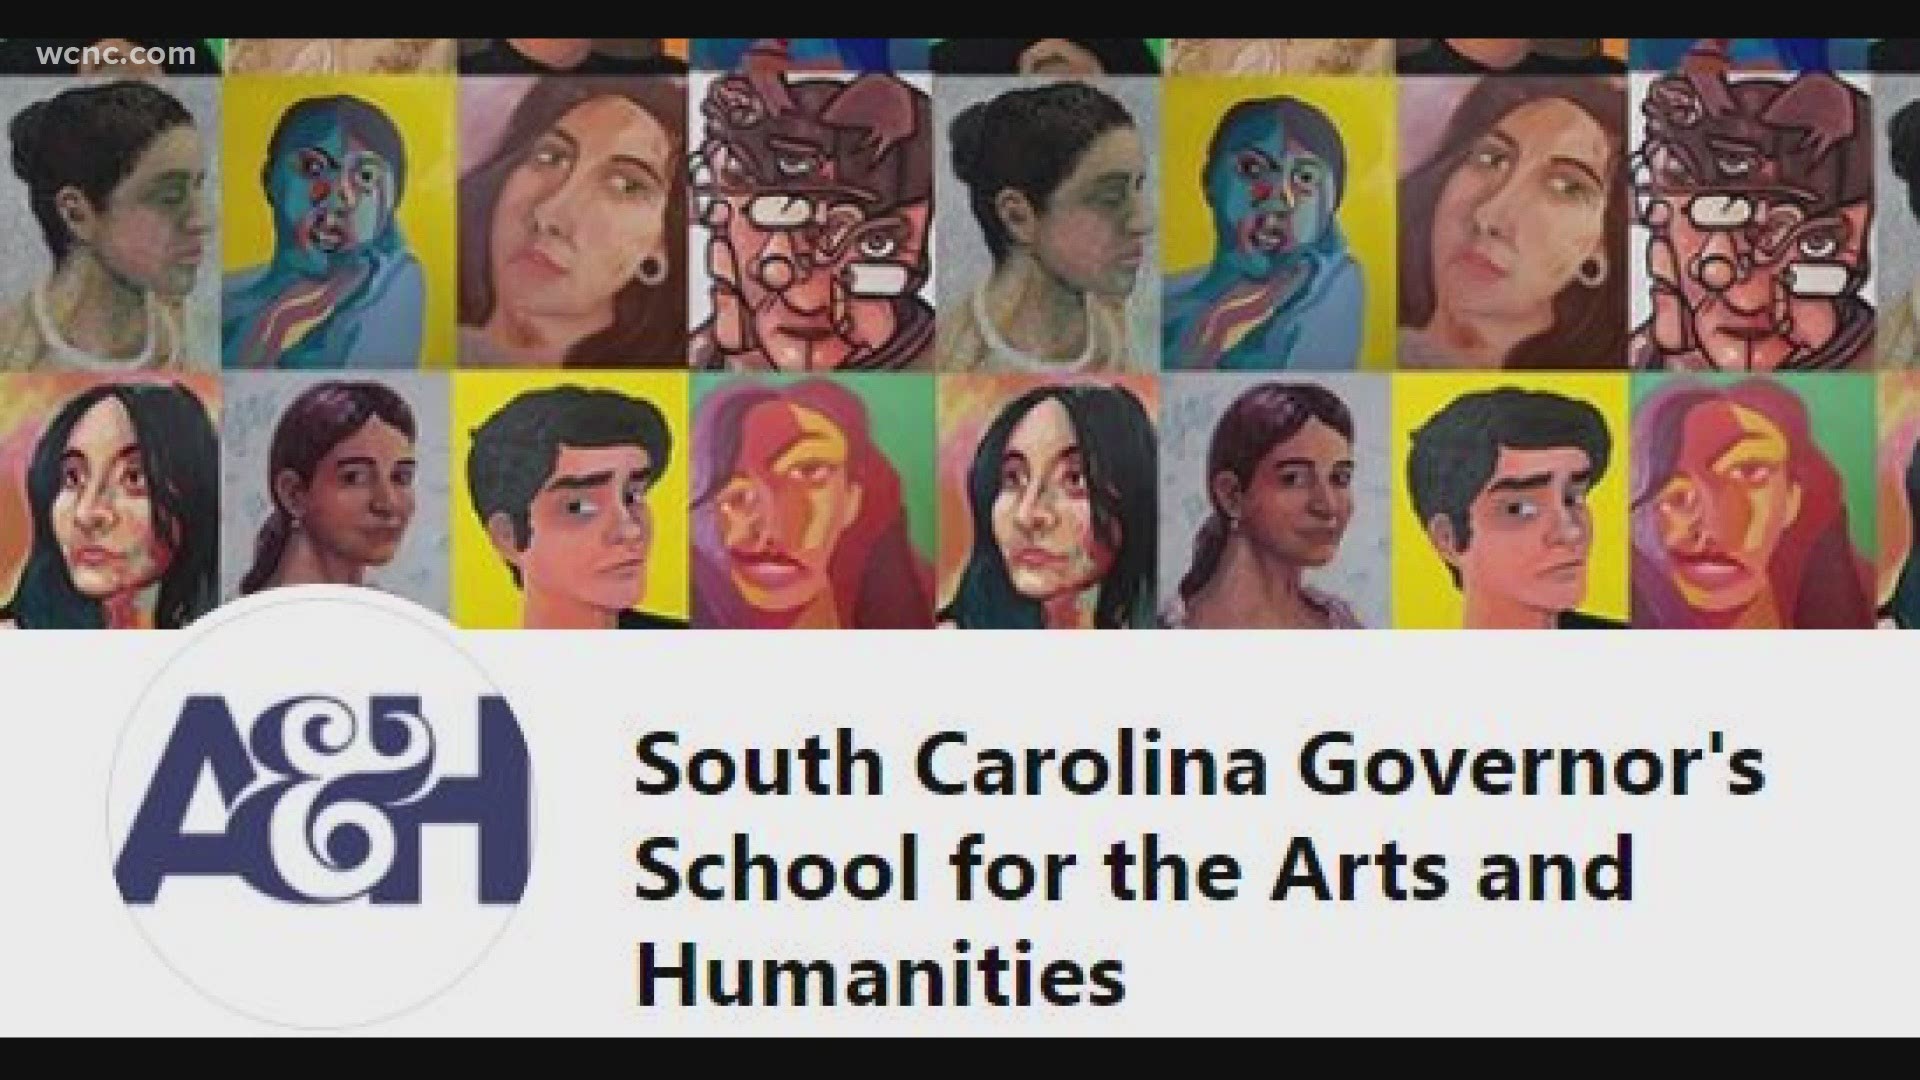 Youjaye Daniels, a Junior at the South Carolina Governor's School for Arts and Humanities, wrote the poem for a class assignment.